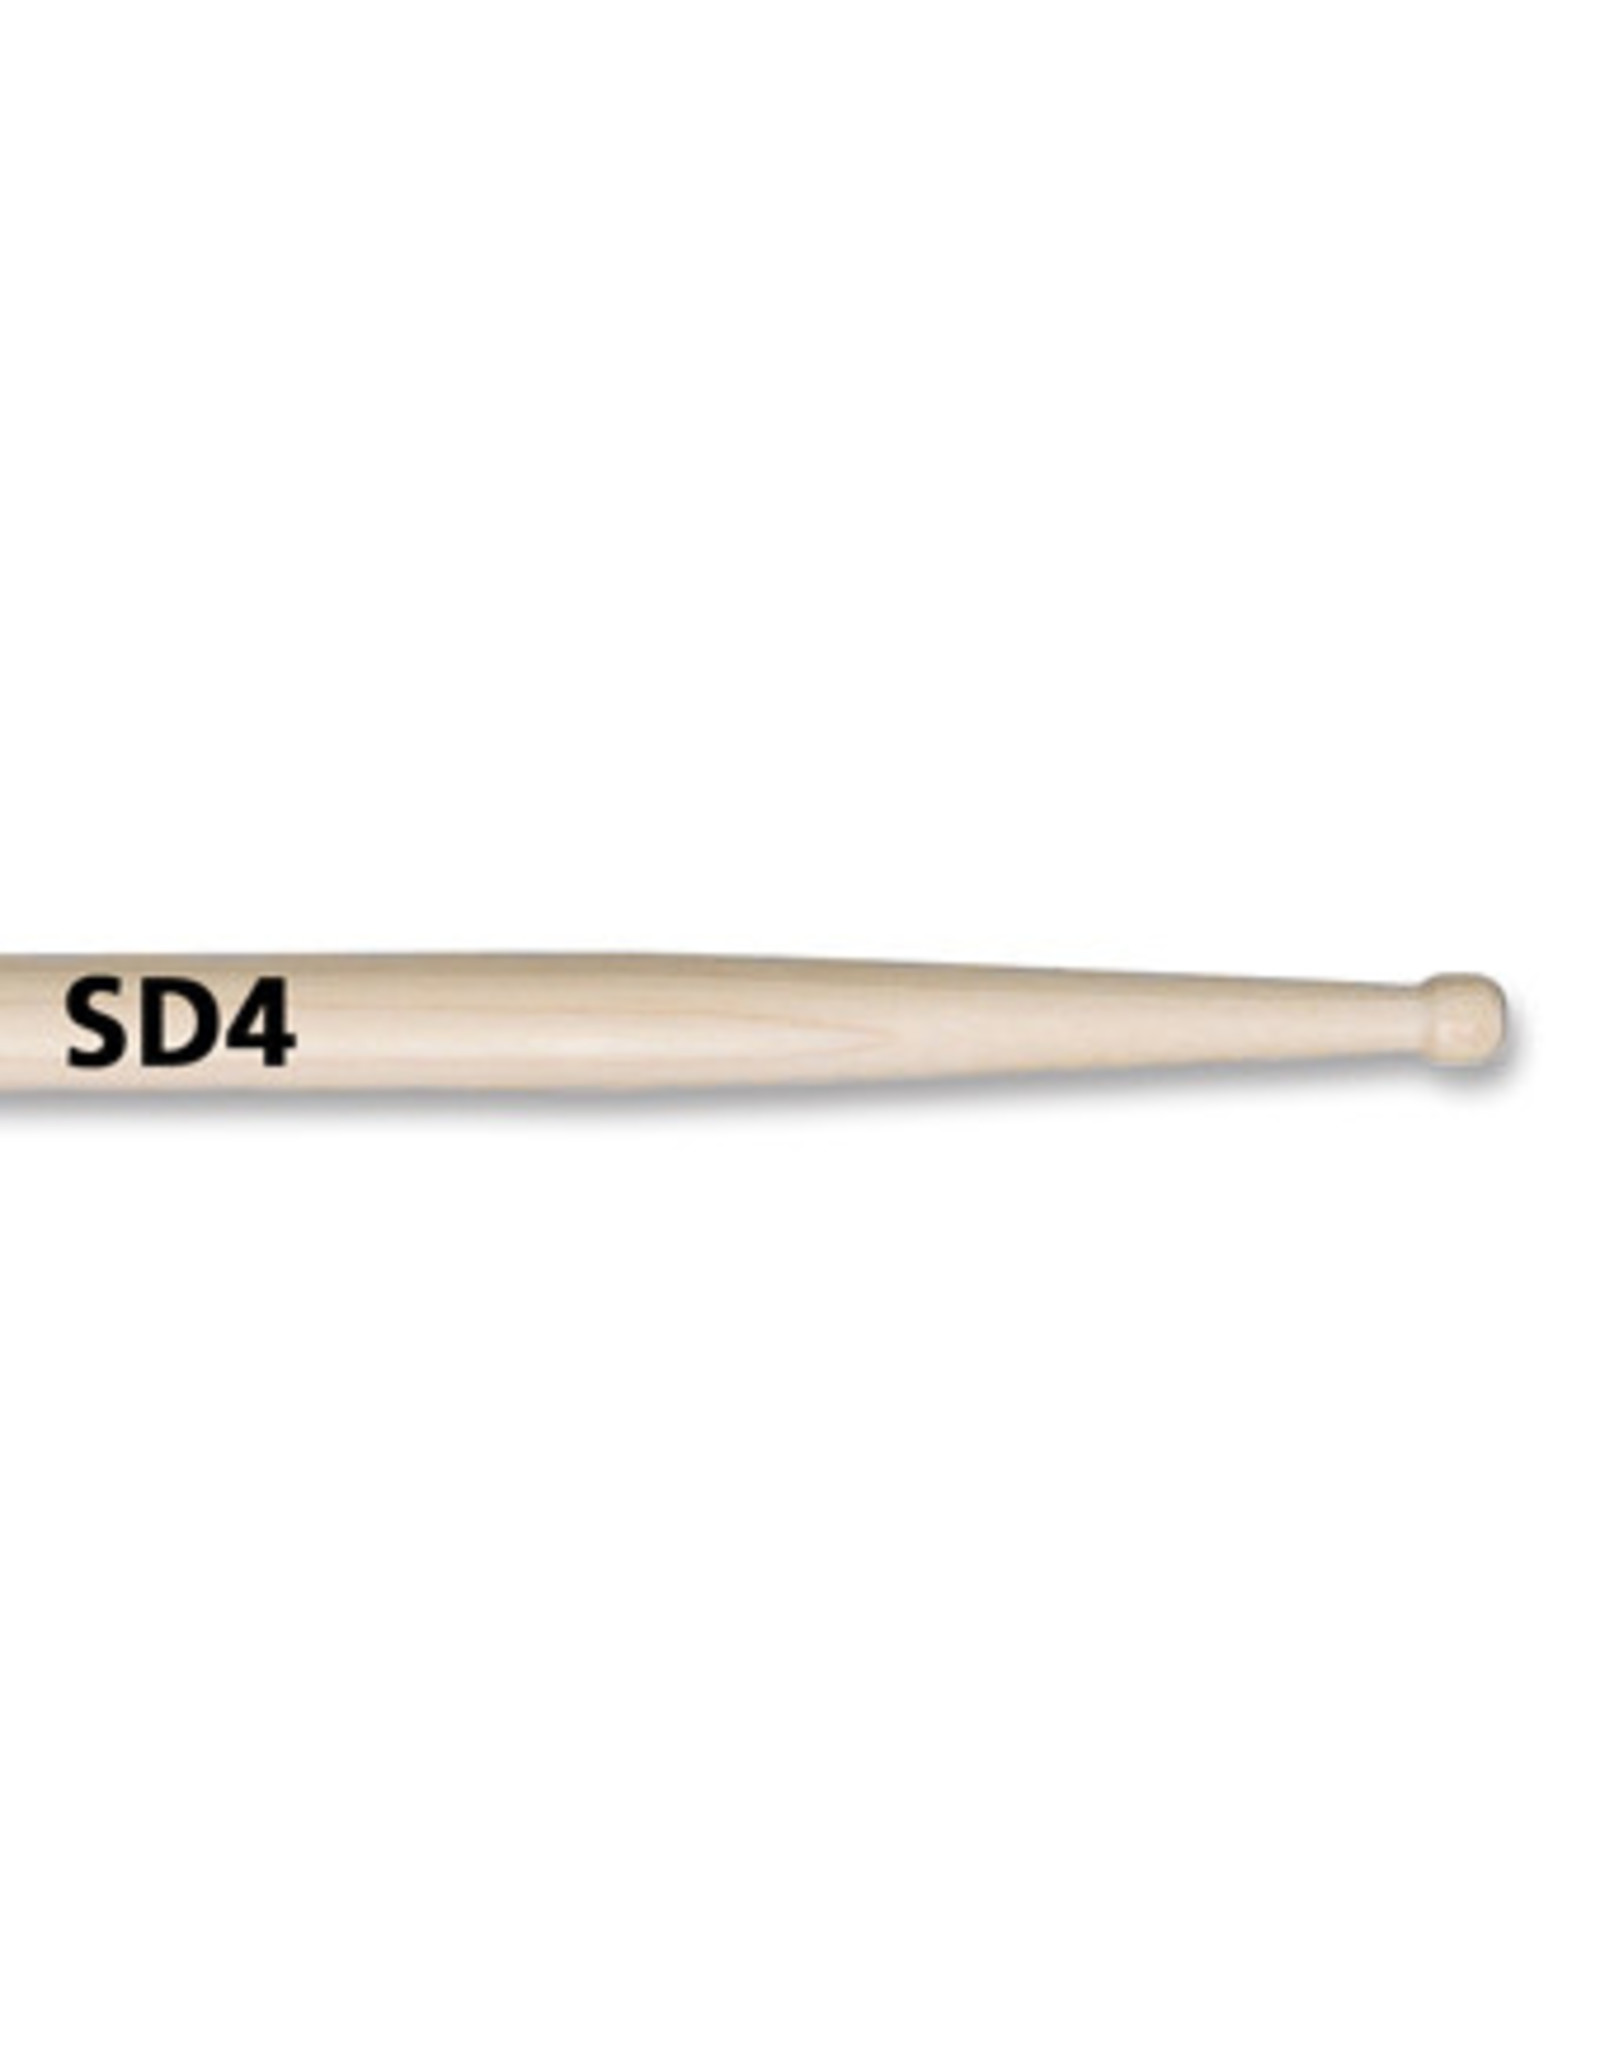 Vic Firth SD4 combo drums